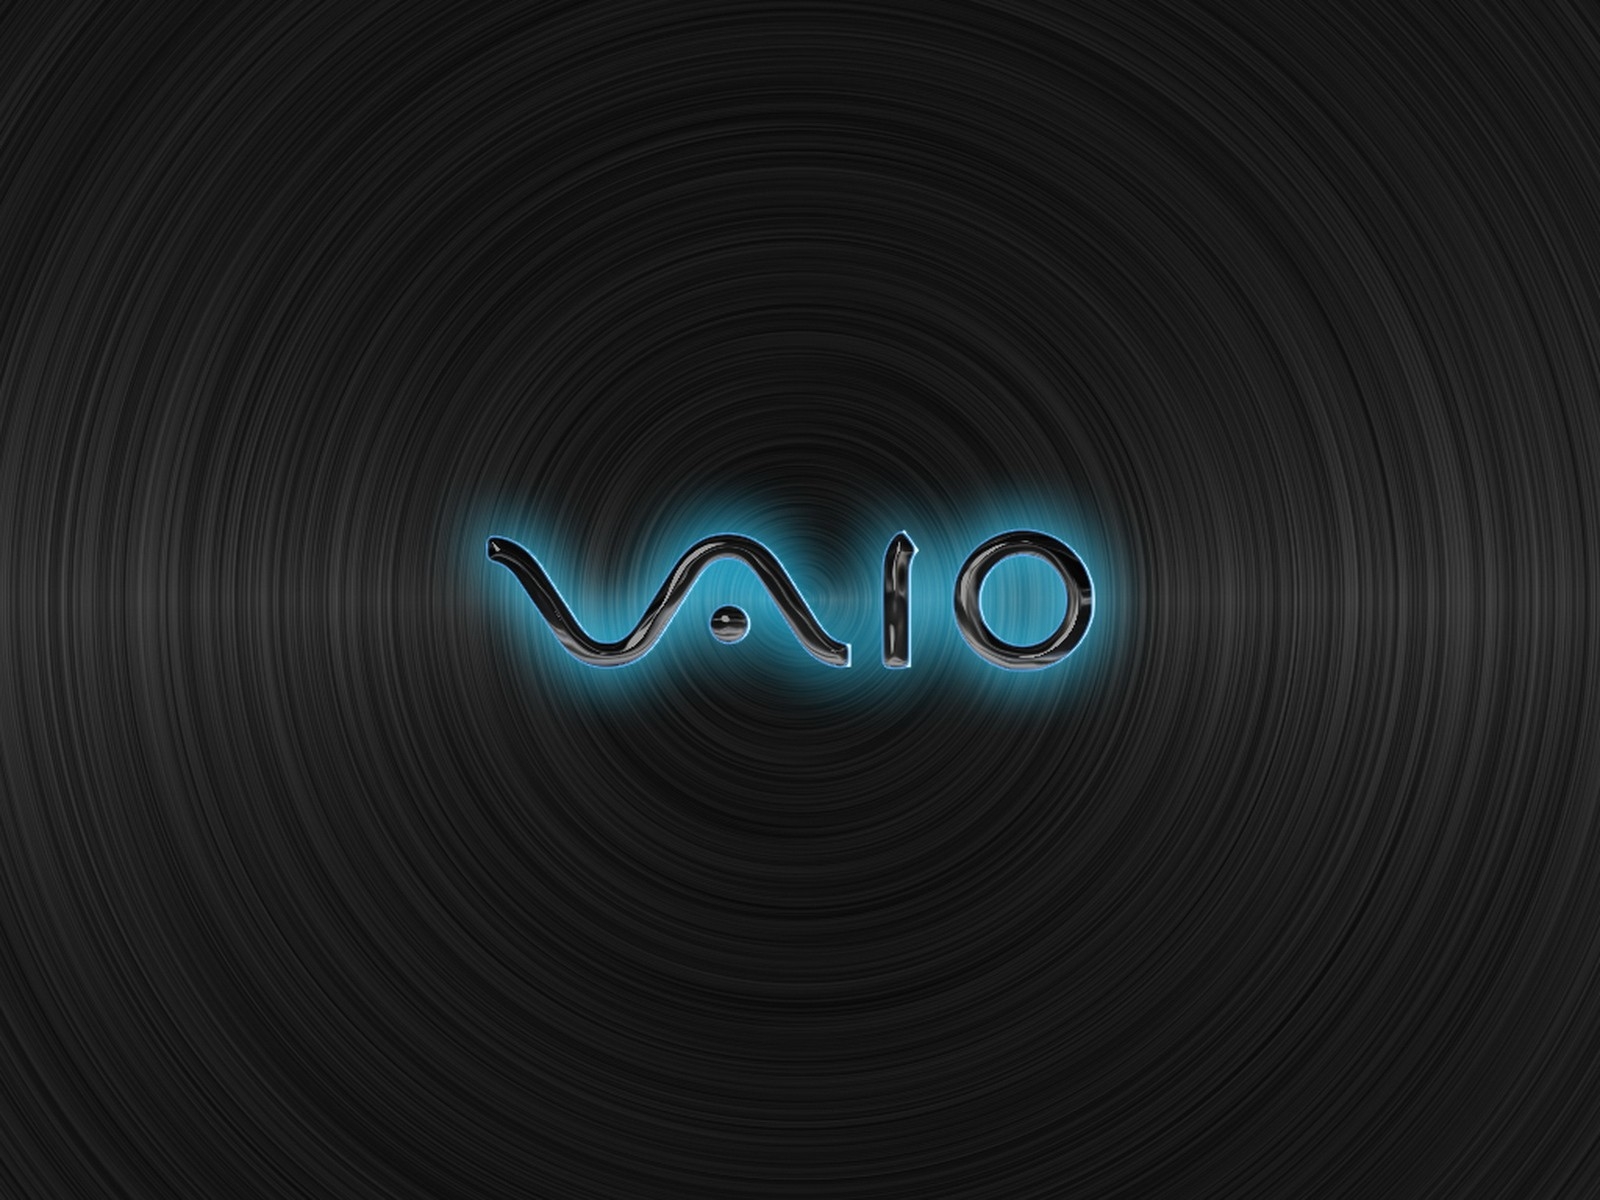 Sony Vaio Gray System Wallpaper Hd Hi Tech 4k Wallpapers Images Photos And Background Wallpapers Den